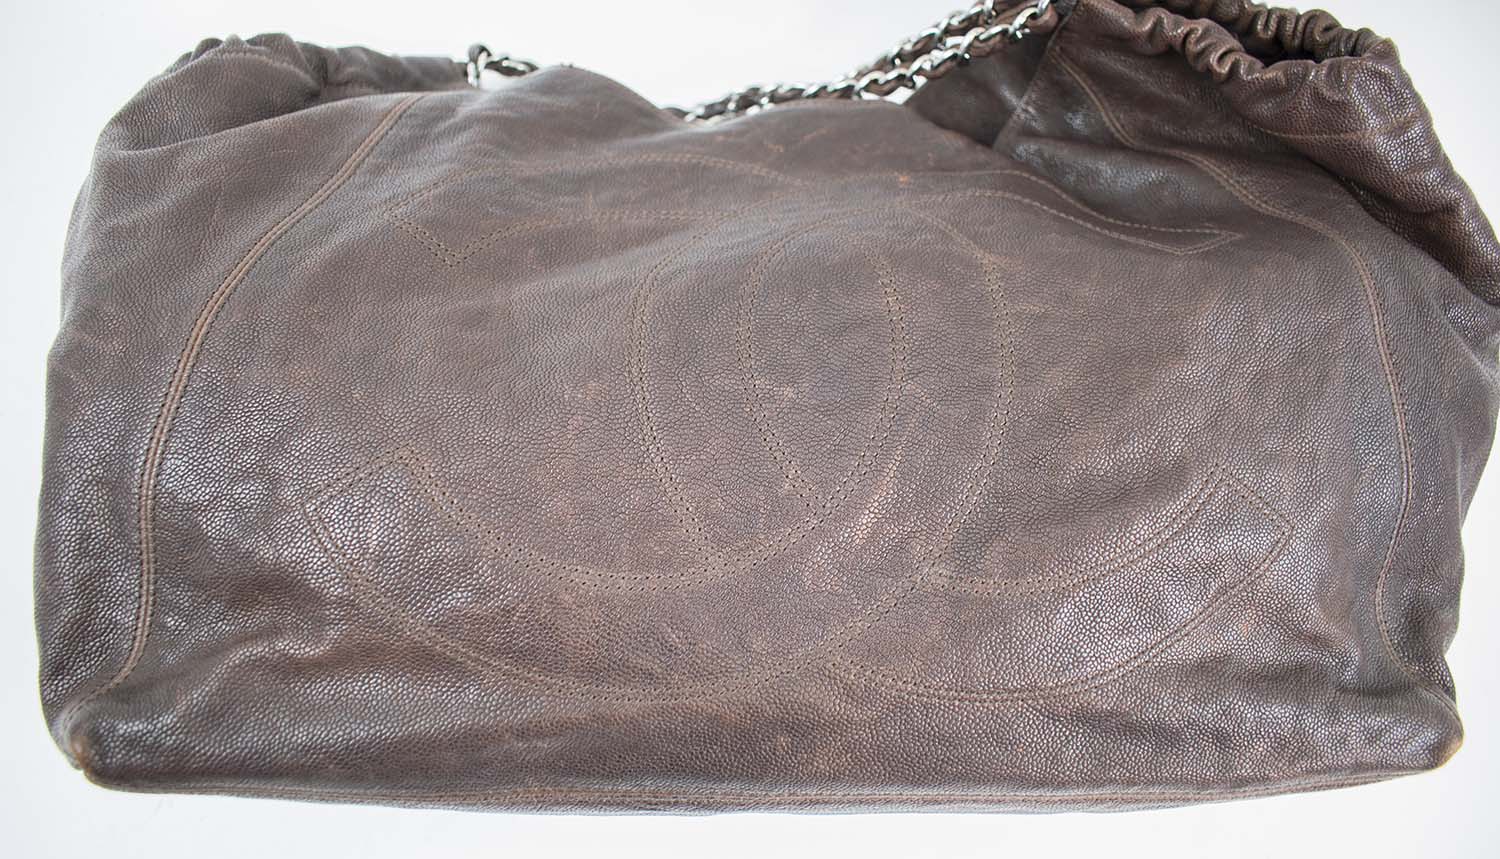 LOUIS VUITTON VINTAGE NOE MONOGRAM BUCKET BAG, leather trims and adjustable  shoulder strap, cord closure, brown fabric lining and brass tone hardware,  26cm x 34cm H x 18cm.